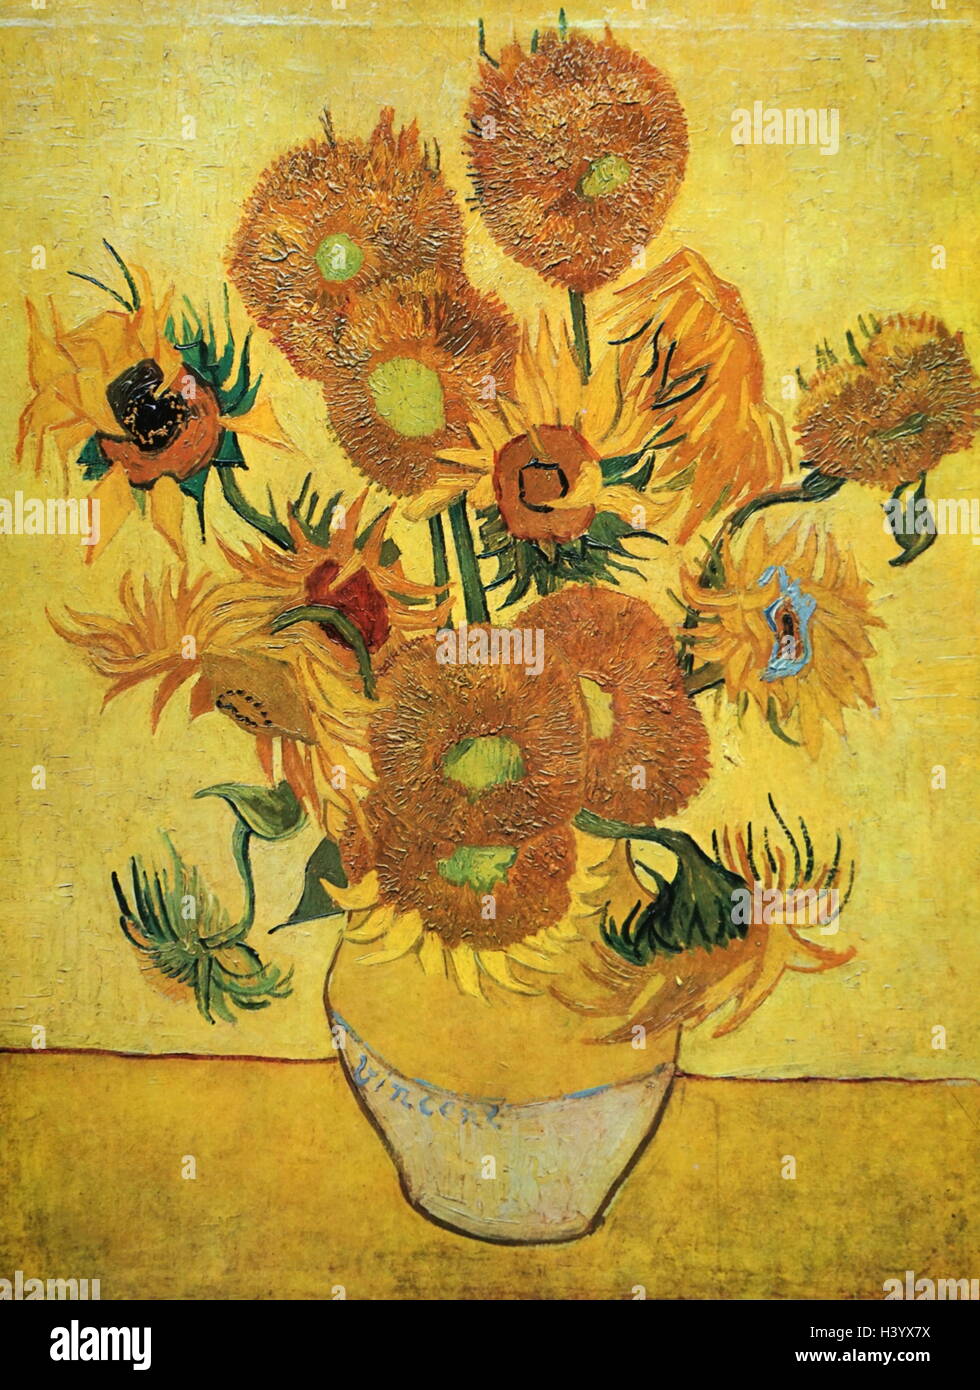 Painting titled 'Sunflowers' by Vincent van Gogh (1853-1890) a Dutch Post-Impressionist painter. Dated 19th Century Stock Photo